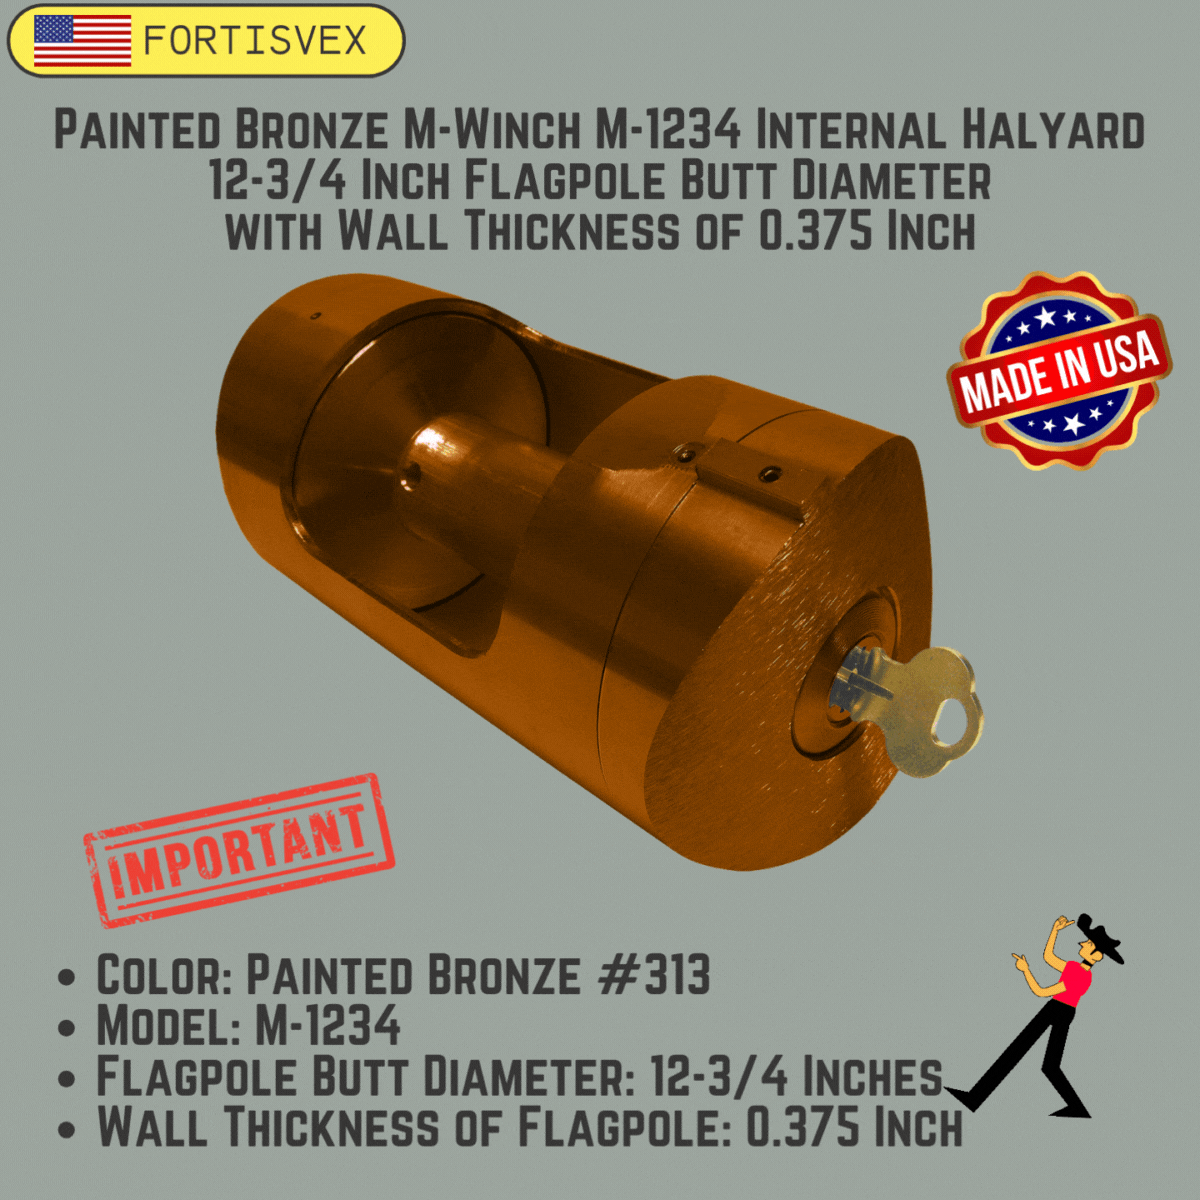 Bronze #313 M-Winch M-1234 Internal Halyard 12-3/4 Inch Flagpole Butt Diameter with Wall Thickness of 0.375 Inch 360025